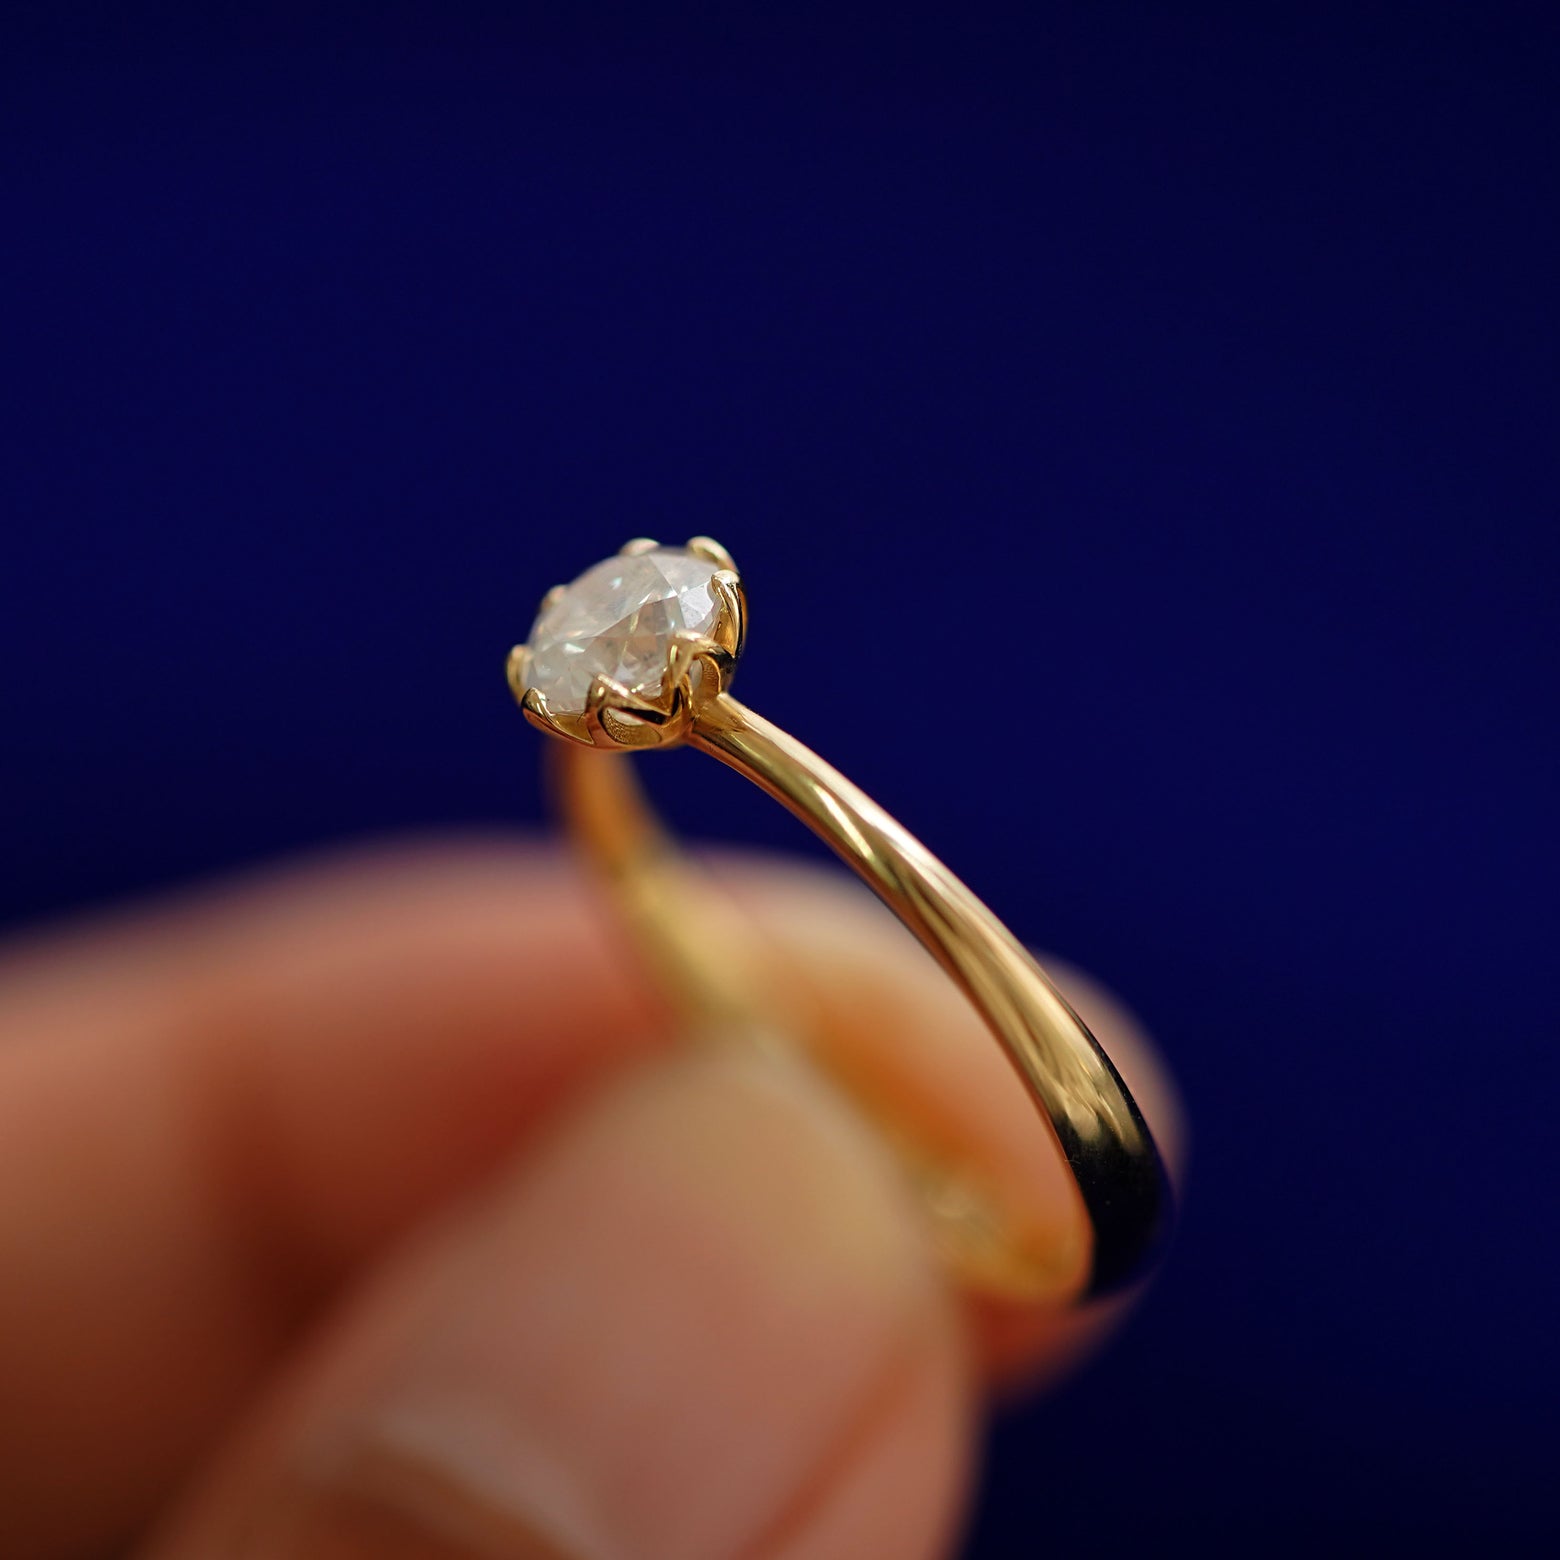 A model holding a Diamond Petal Ring tilted to show the side of the ring